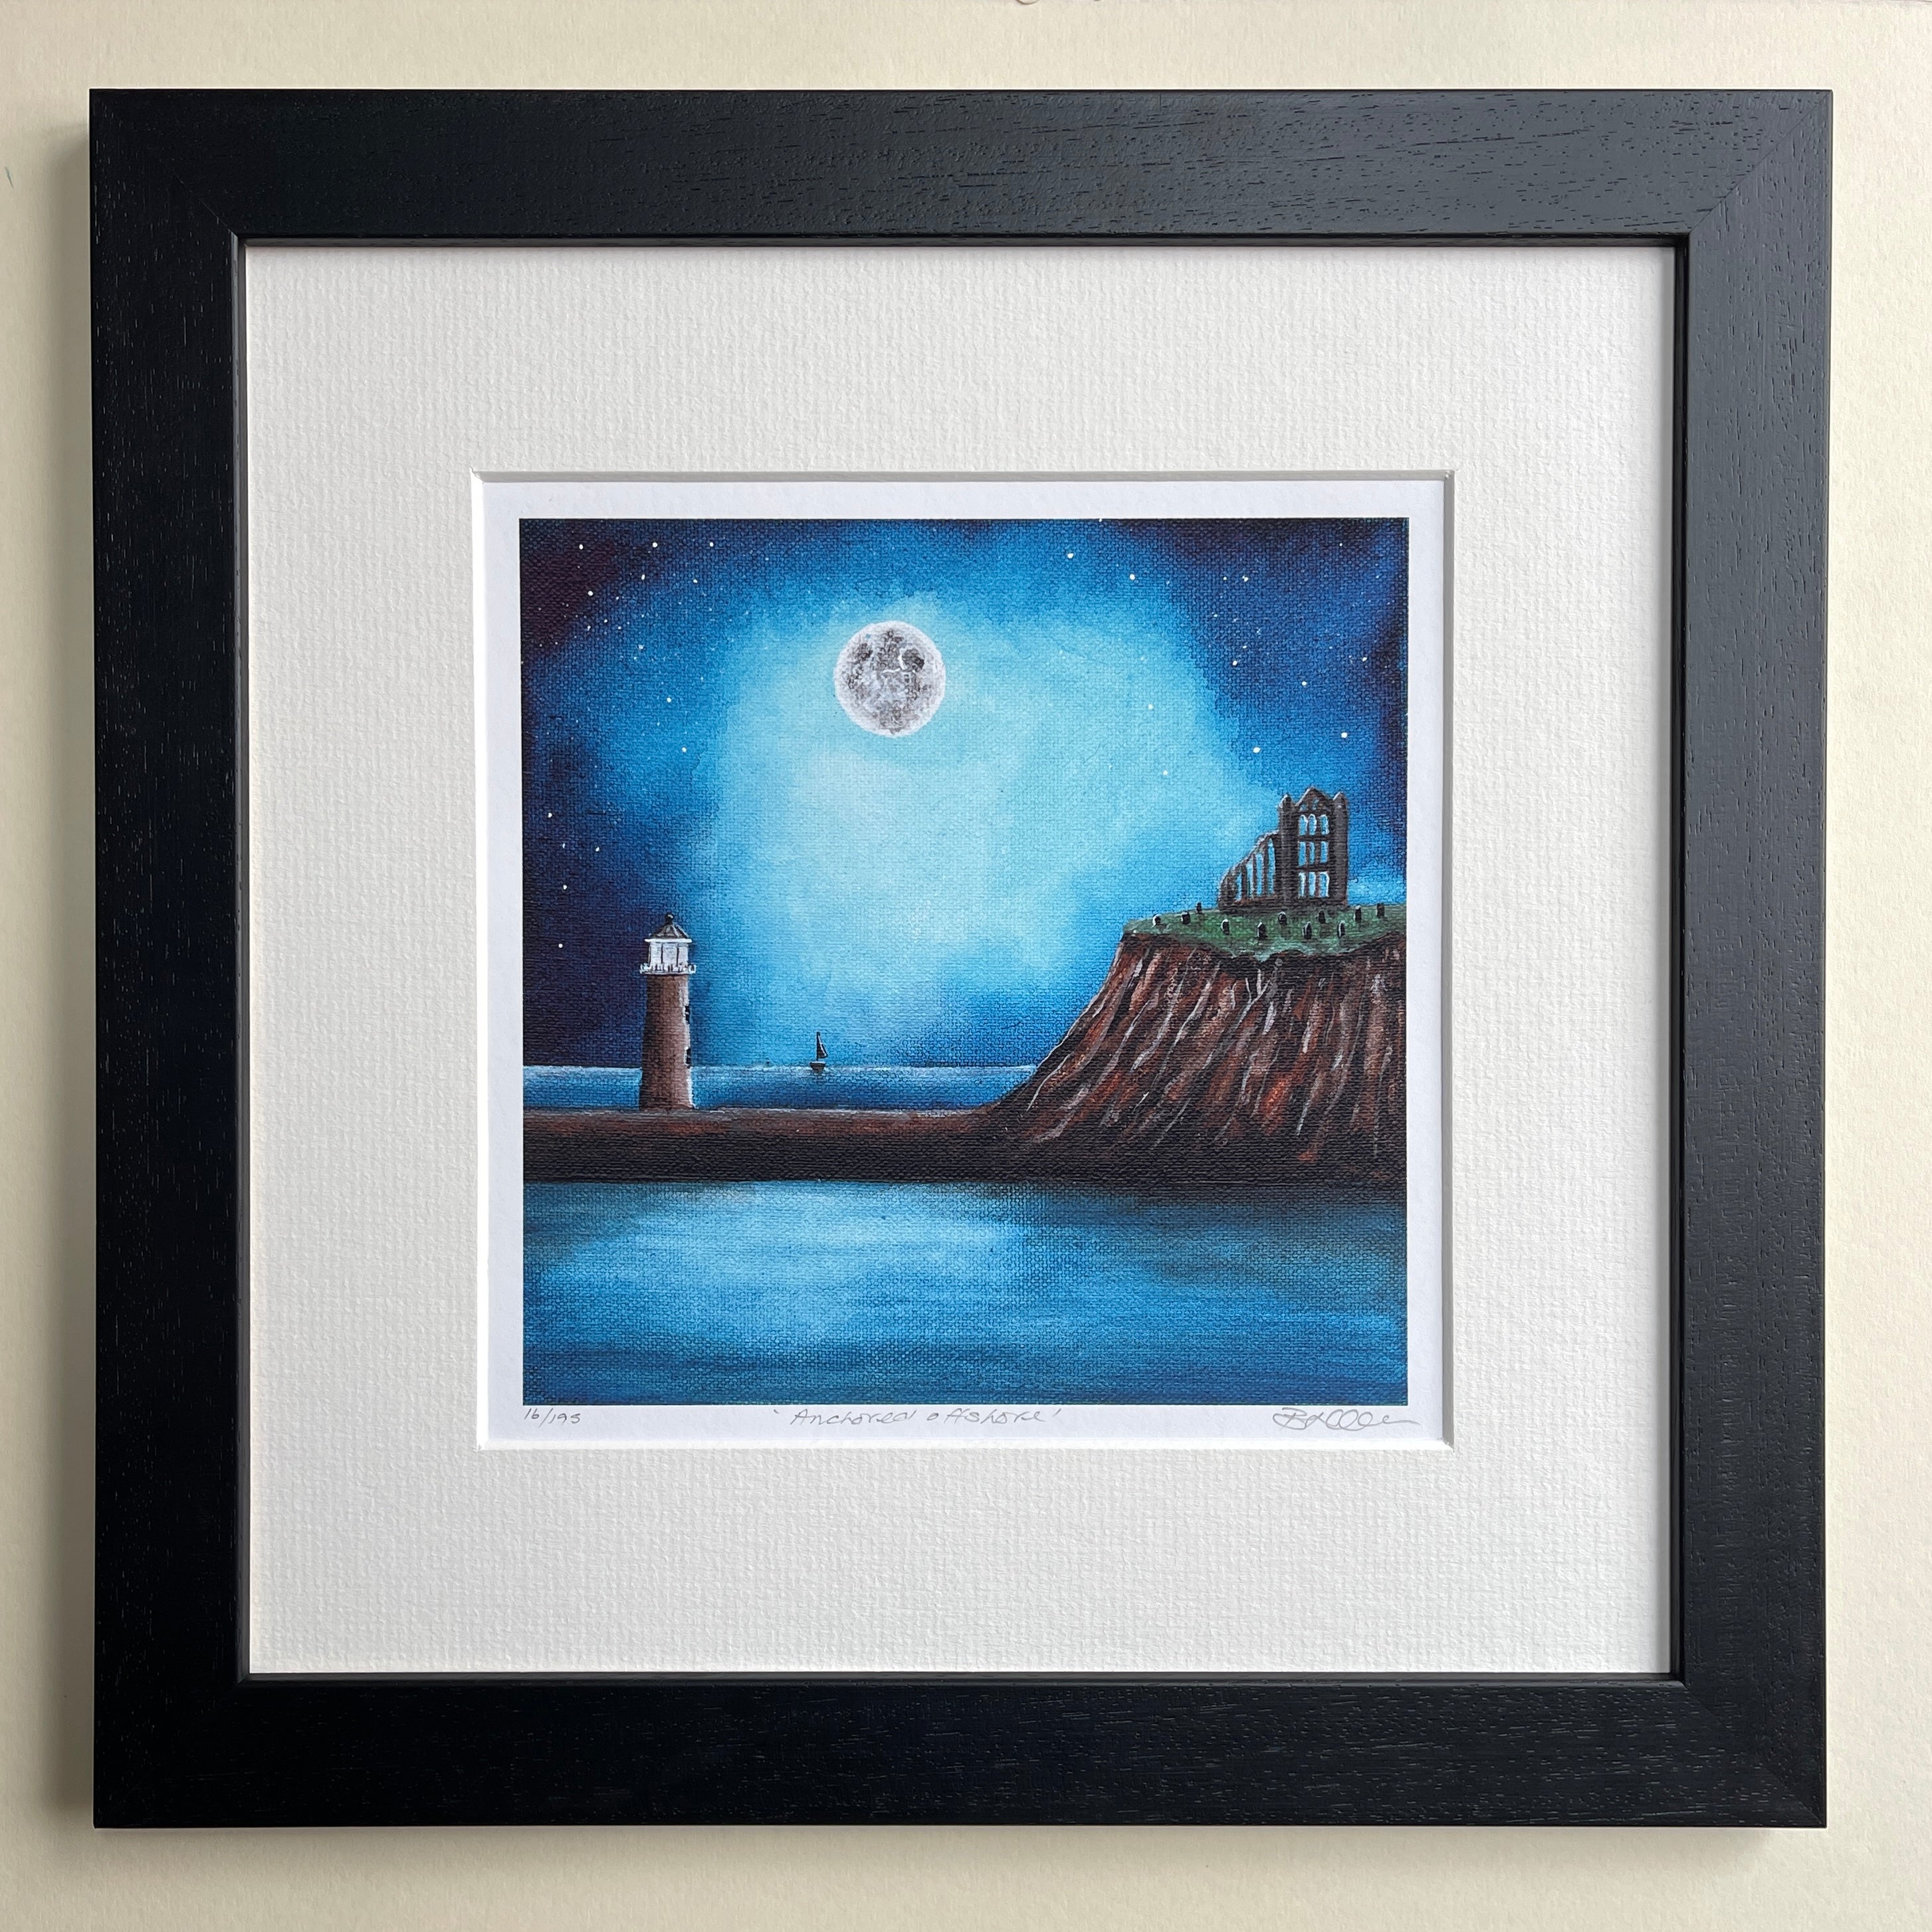 Anchored Offshore - Whitby - Limited Edition Framed Print